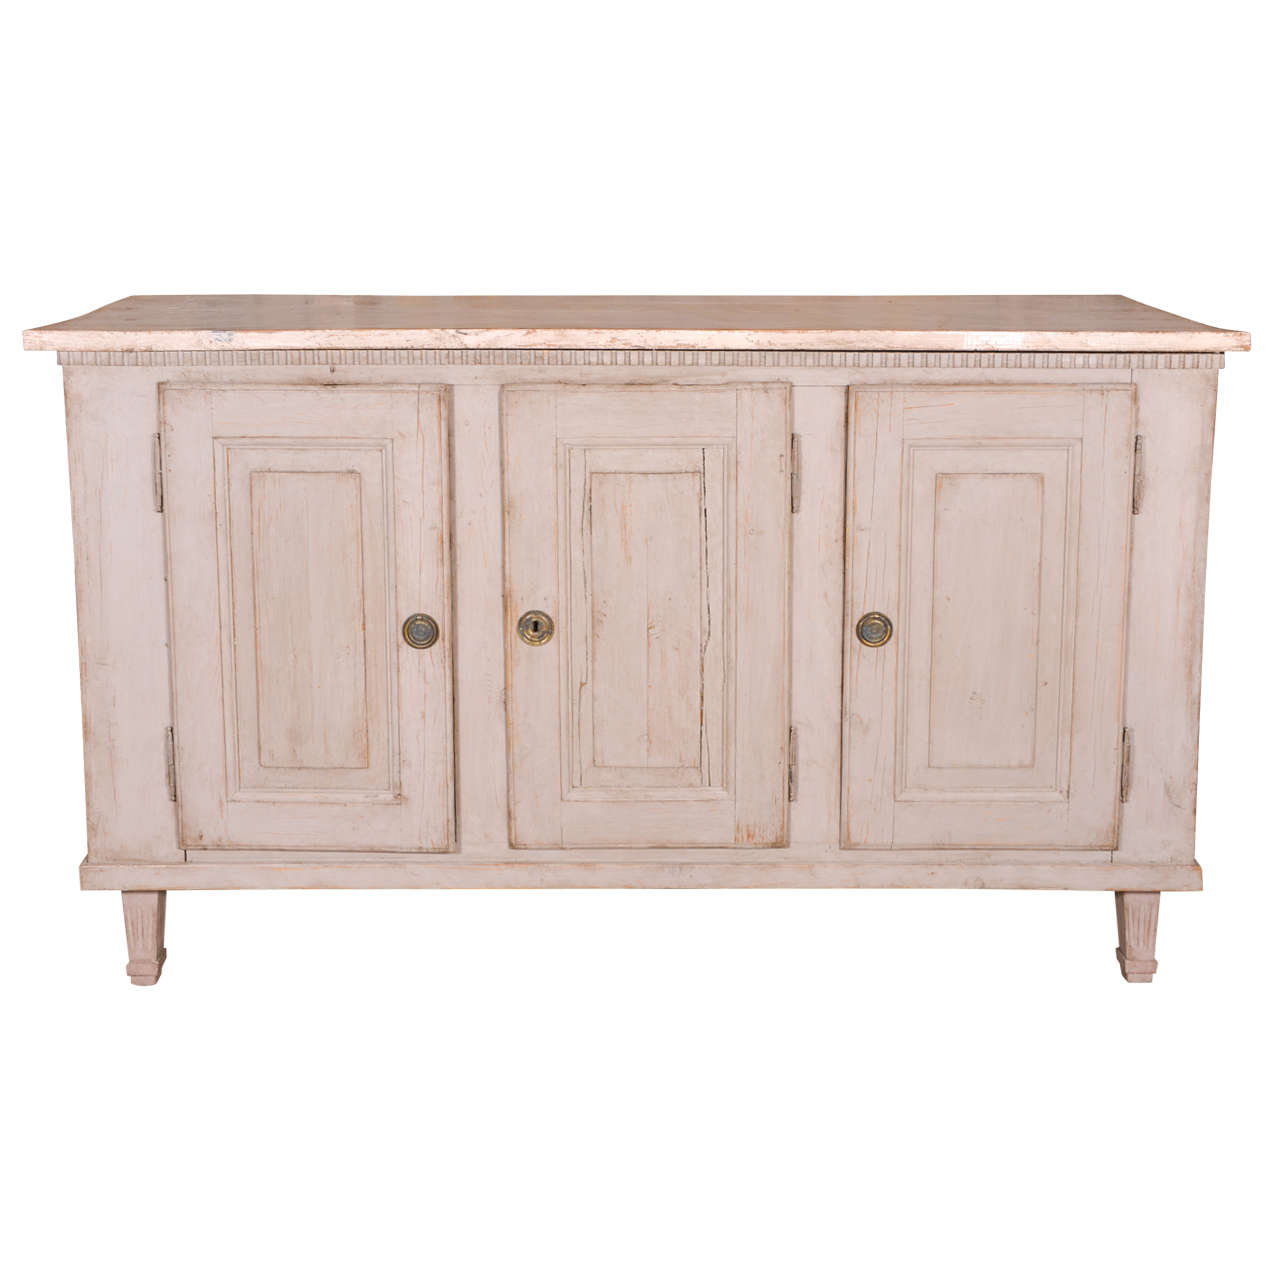 Swedish Gustavian Painted Cabinet or Buffet